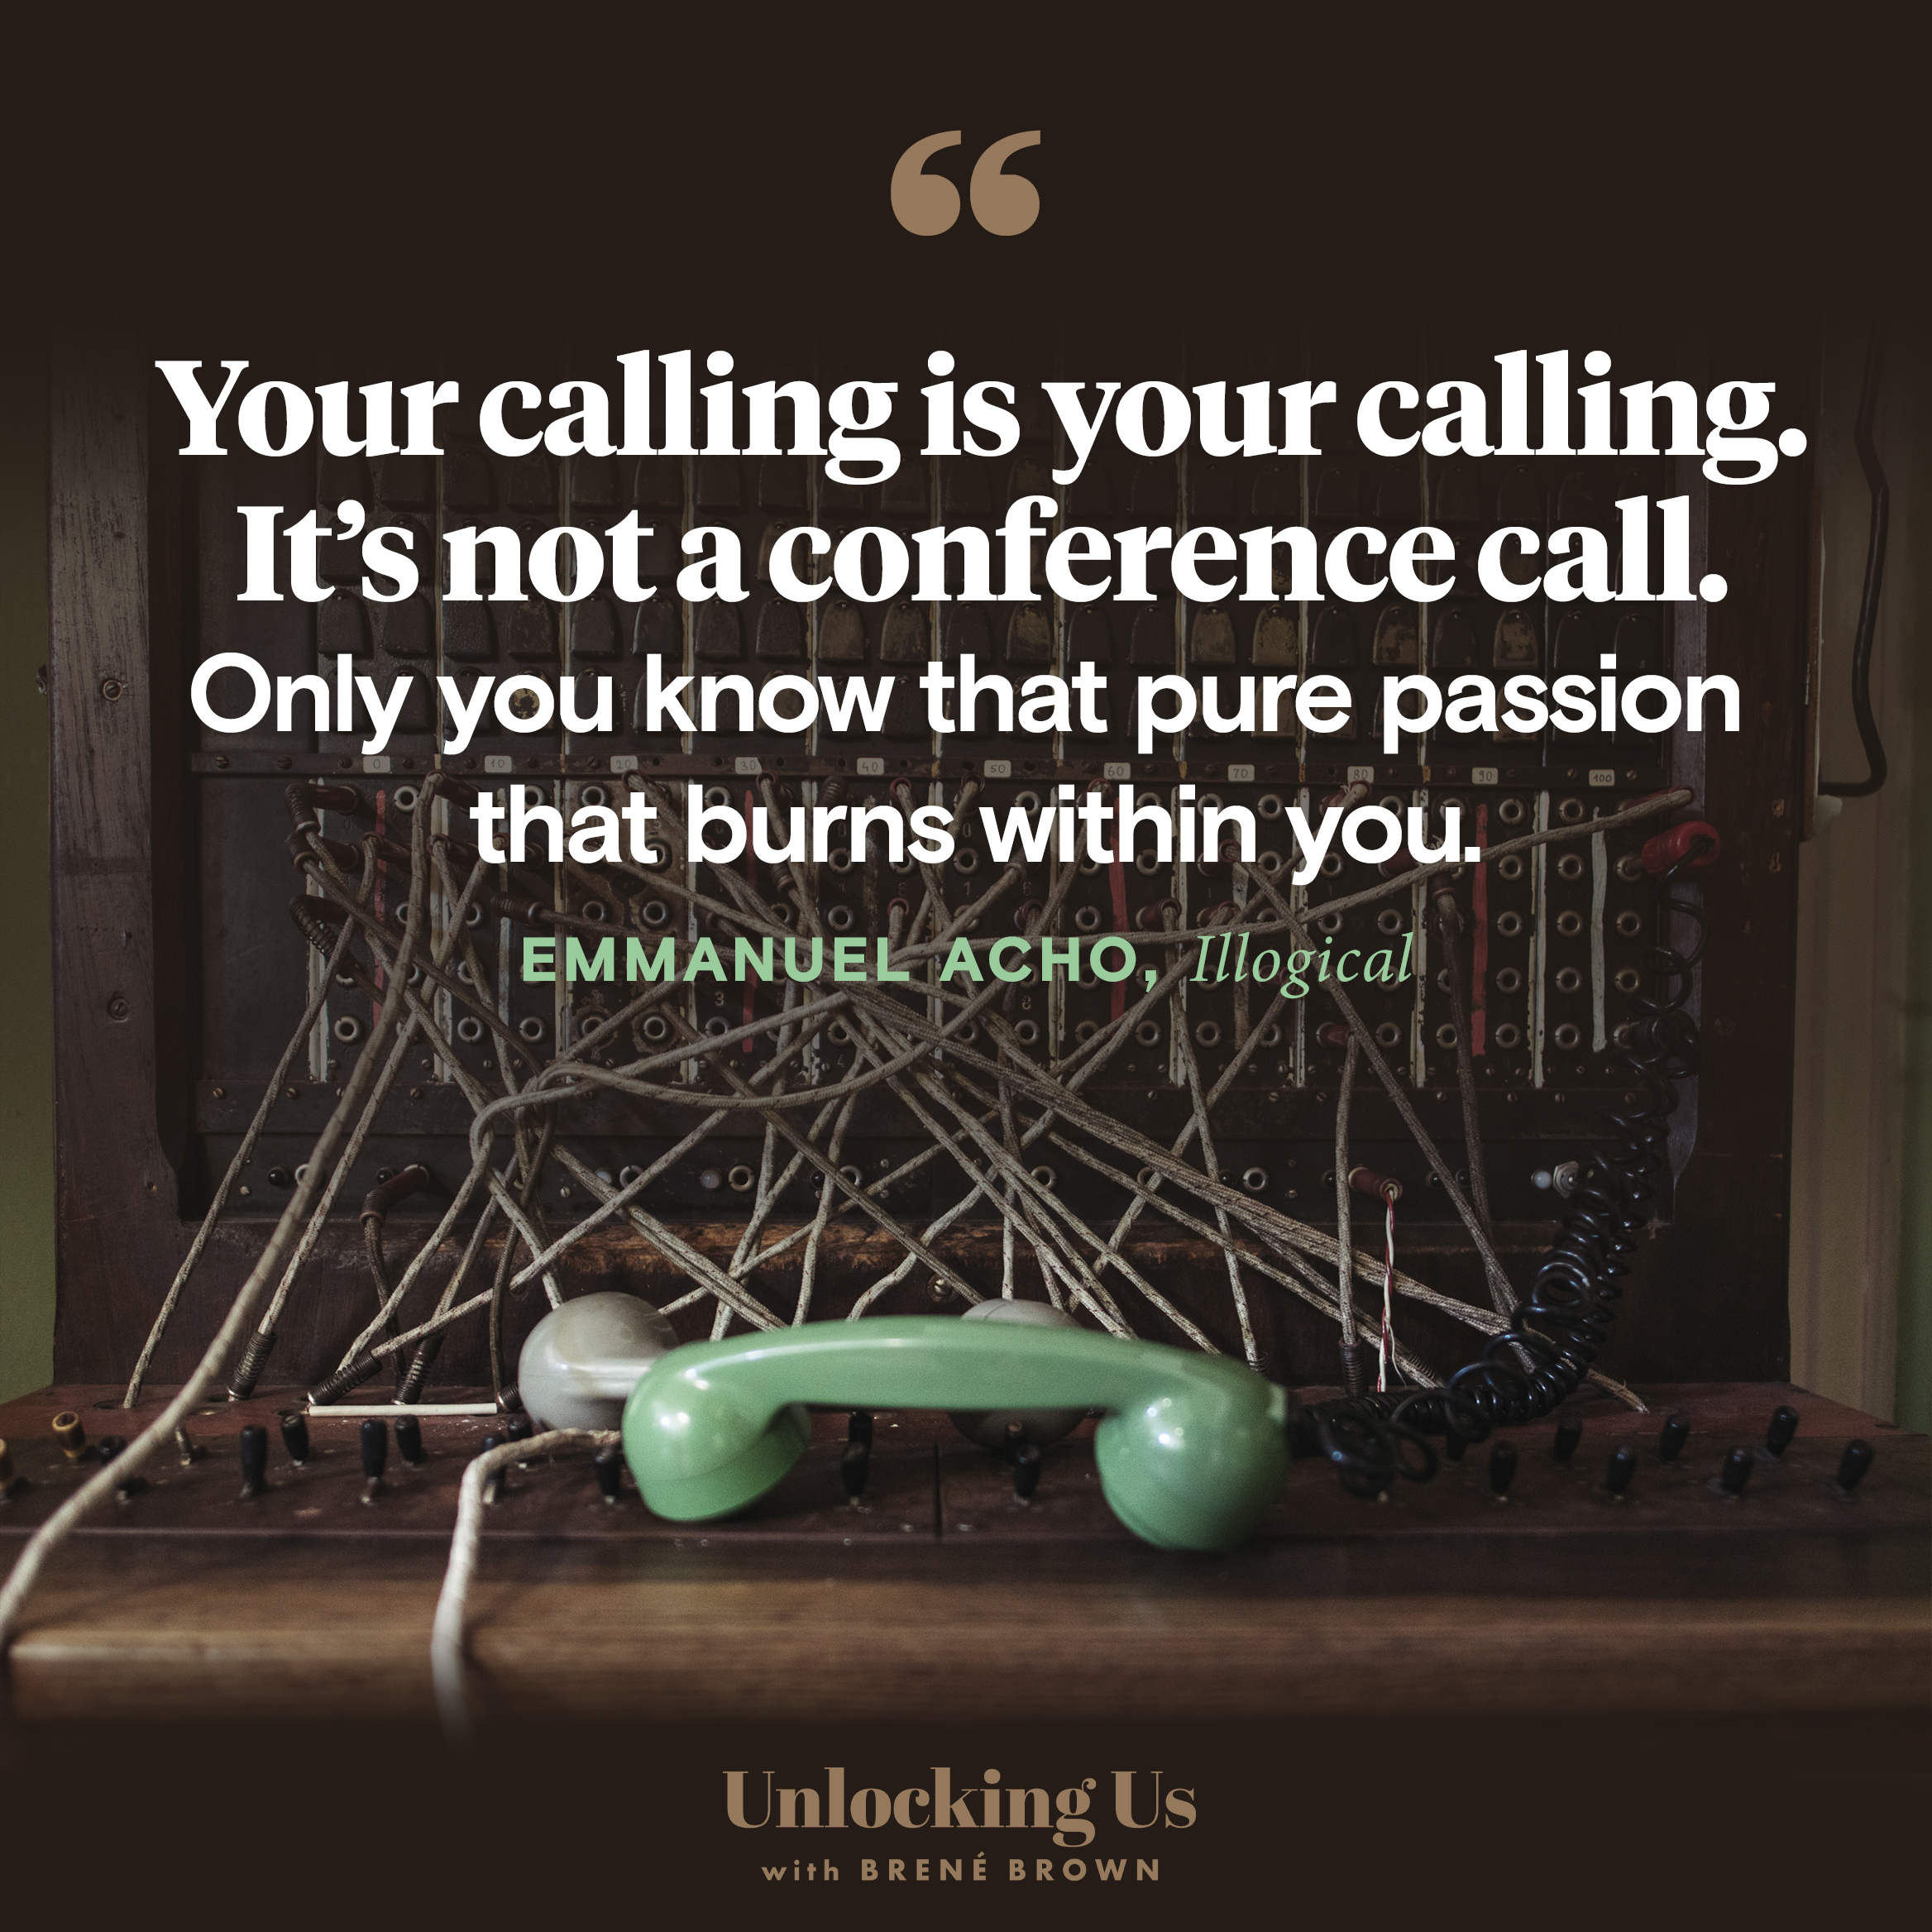 A quote from Emmanuel Acho’s book ‘Illogical’: Your calling is your calling. It’s not a conference call. Only you know that pure passion that burns within you.